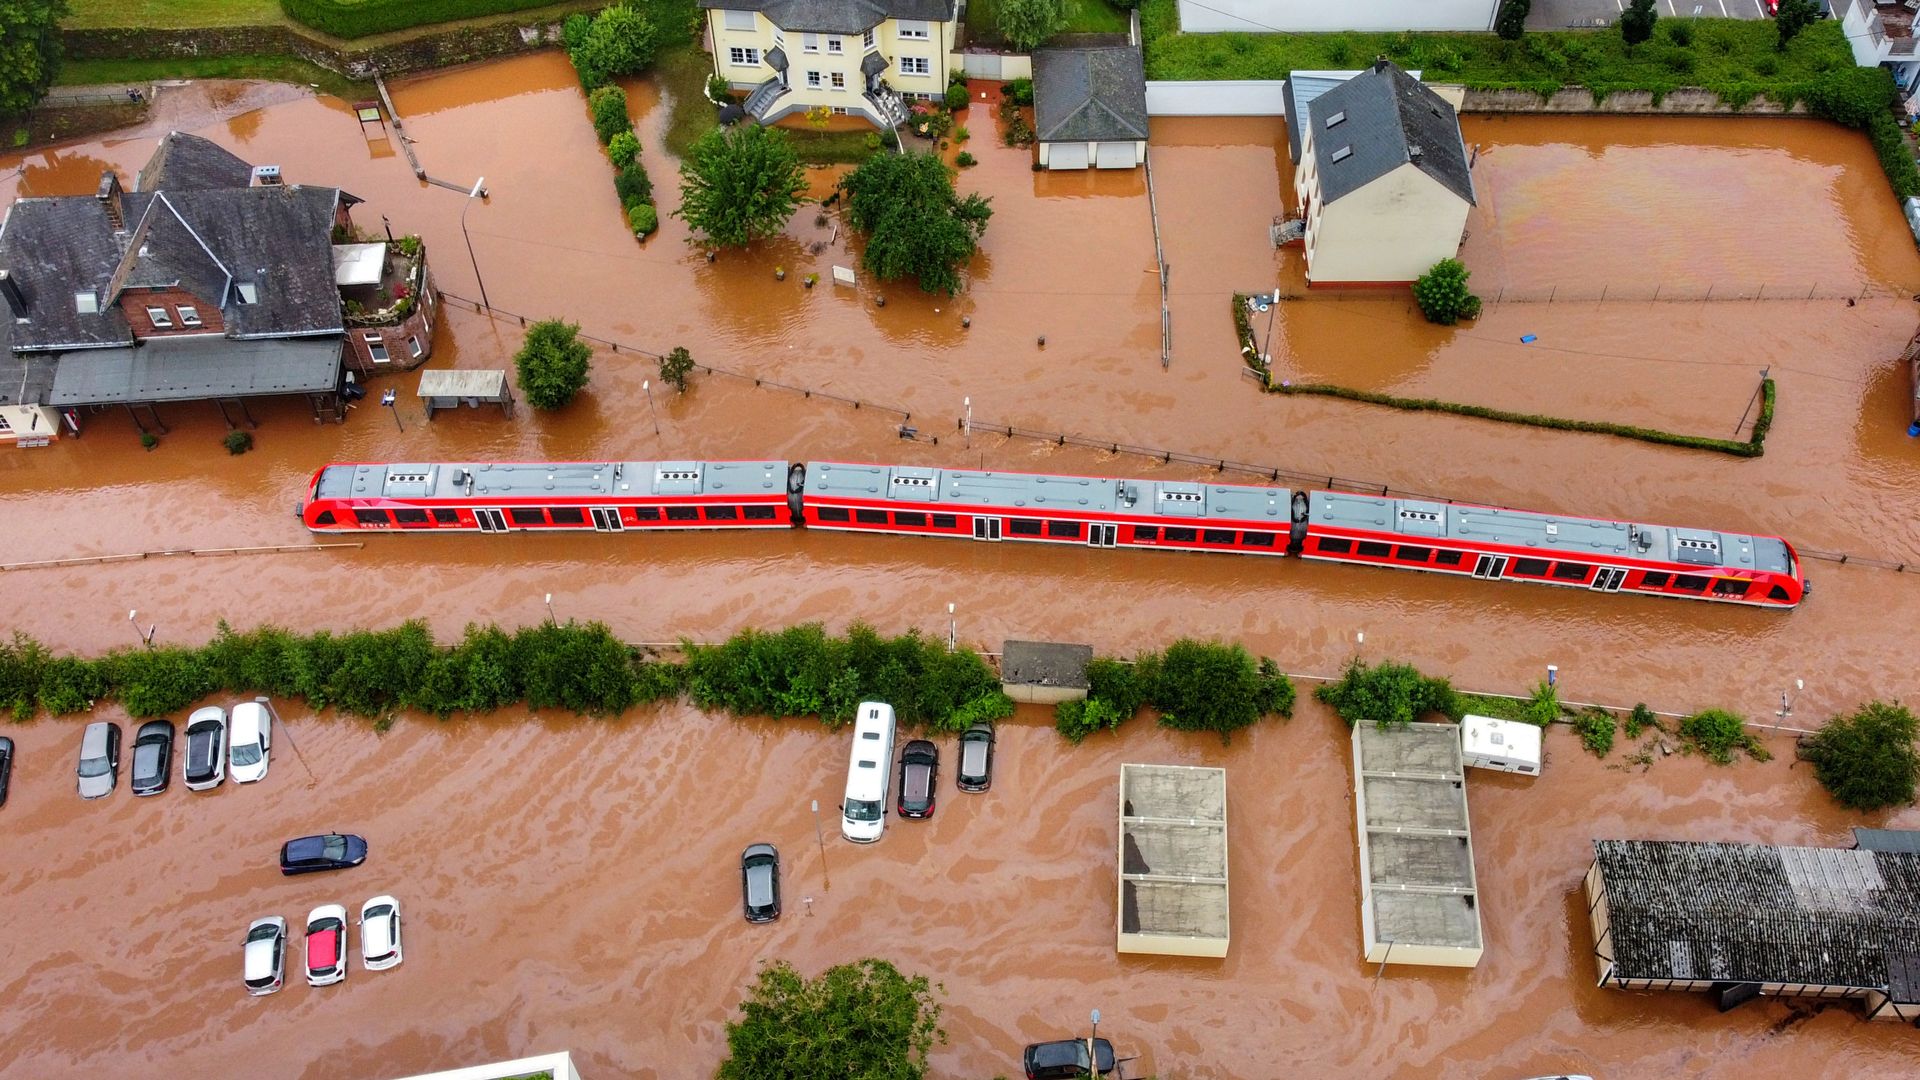 An aerial shot of a train partially submerged under flooding.